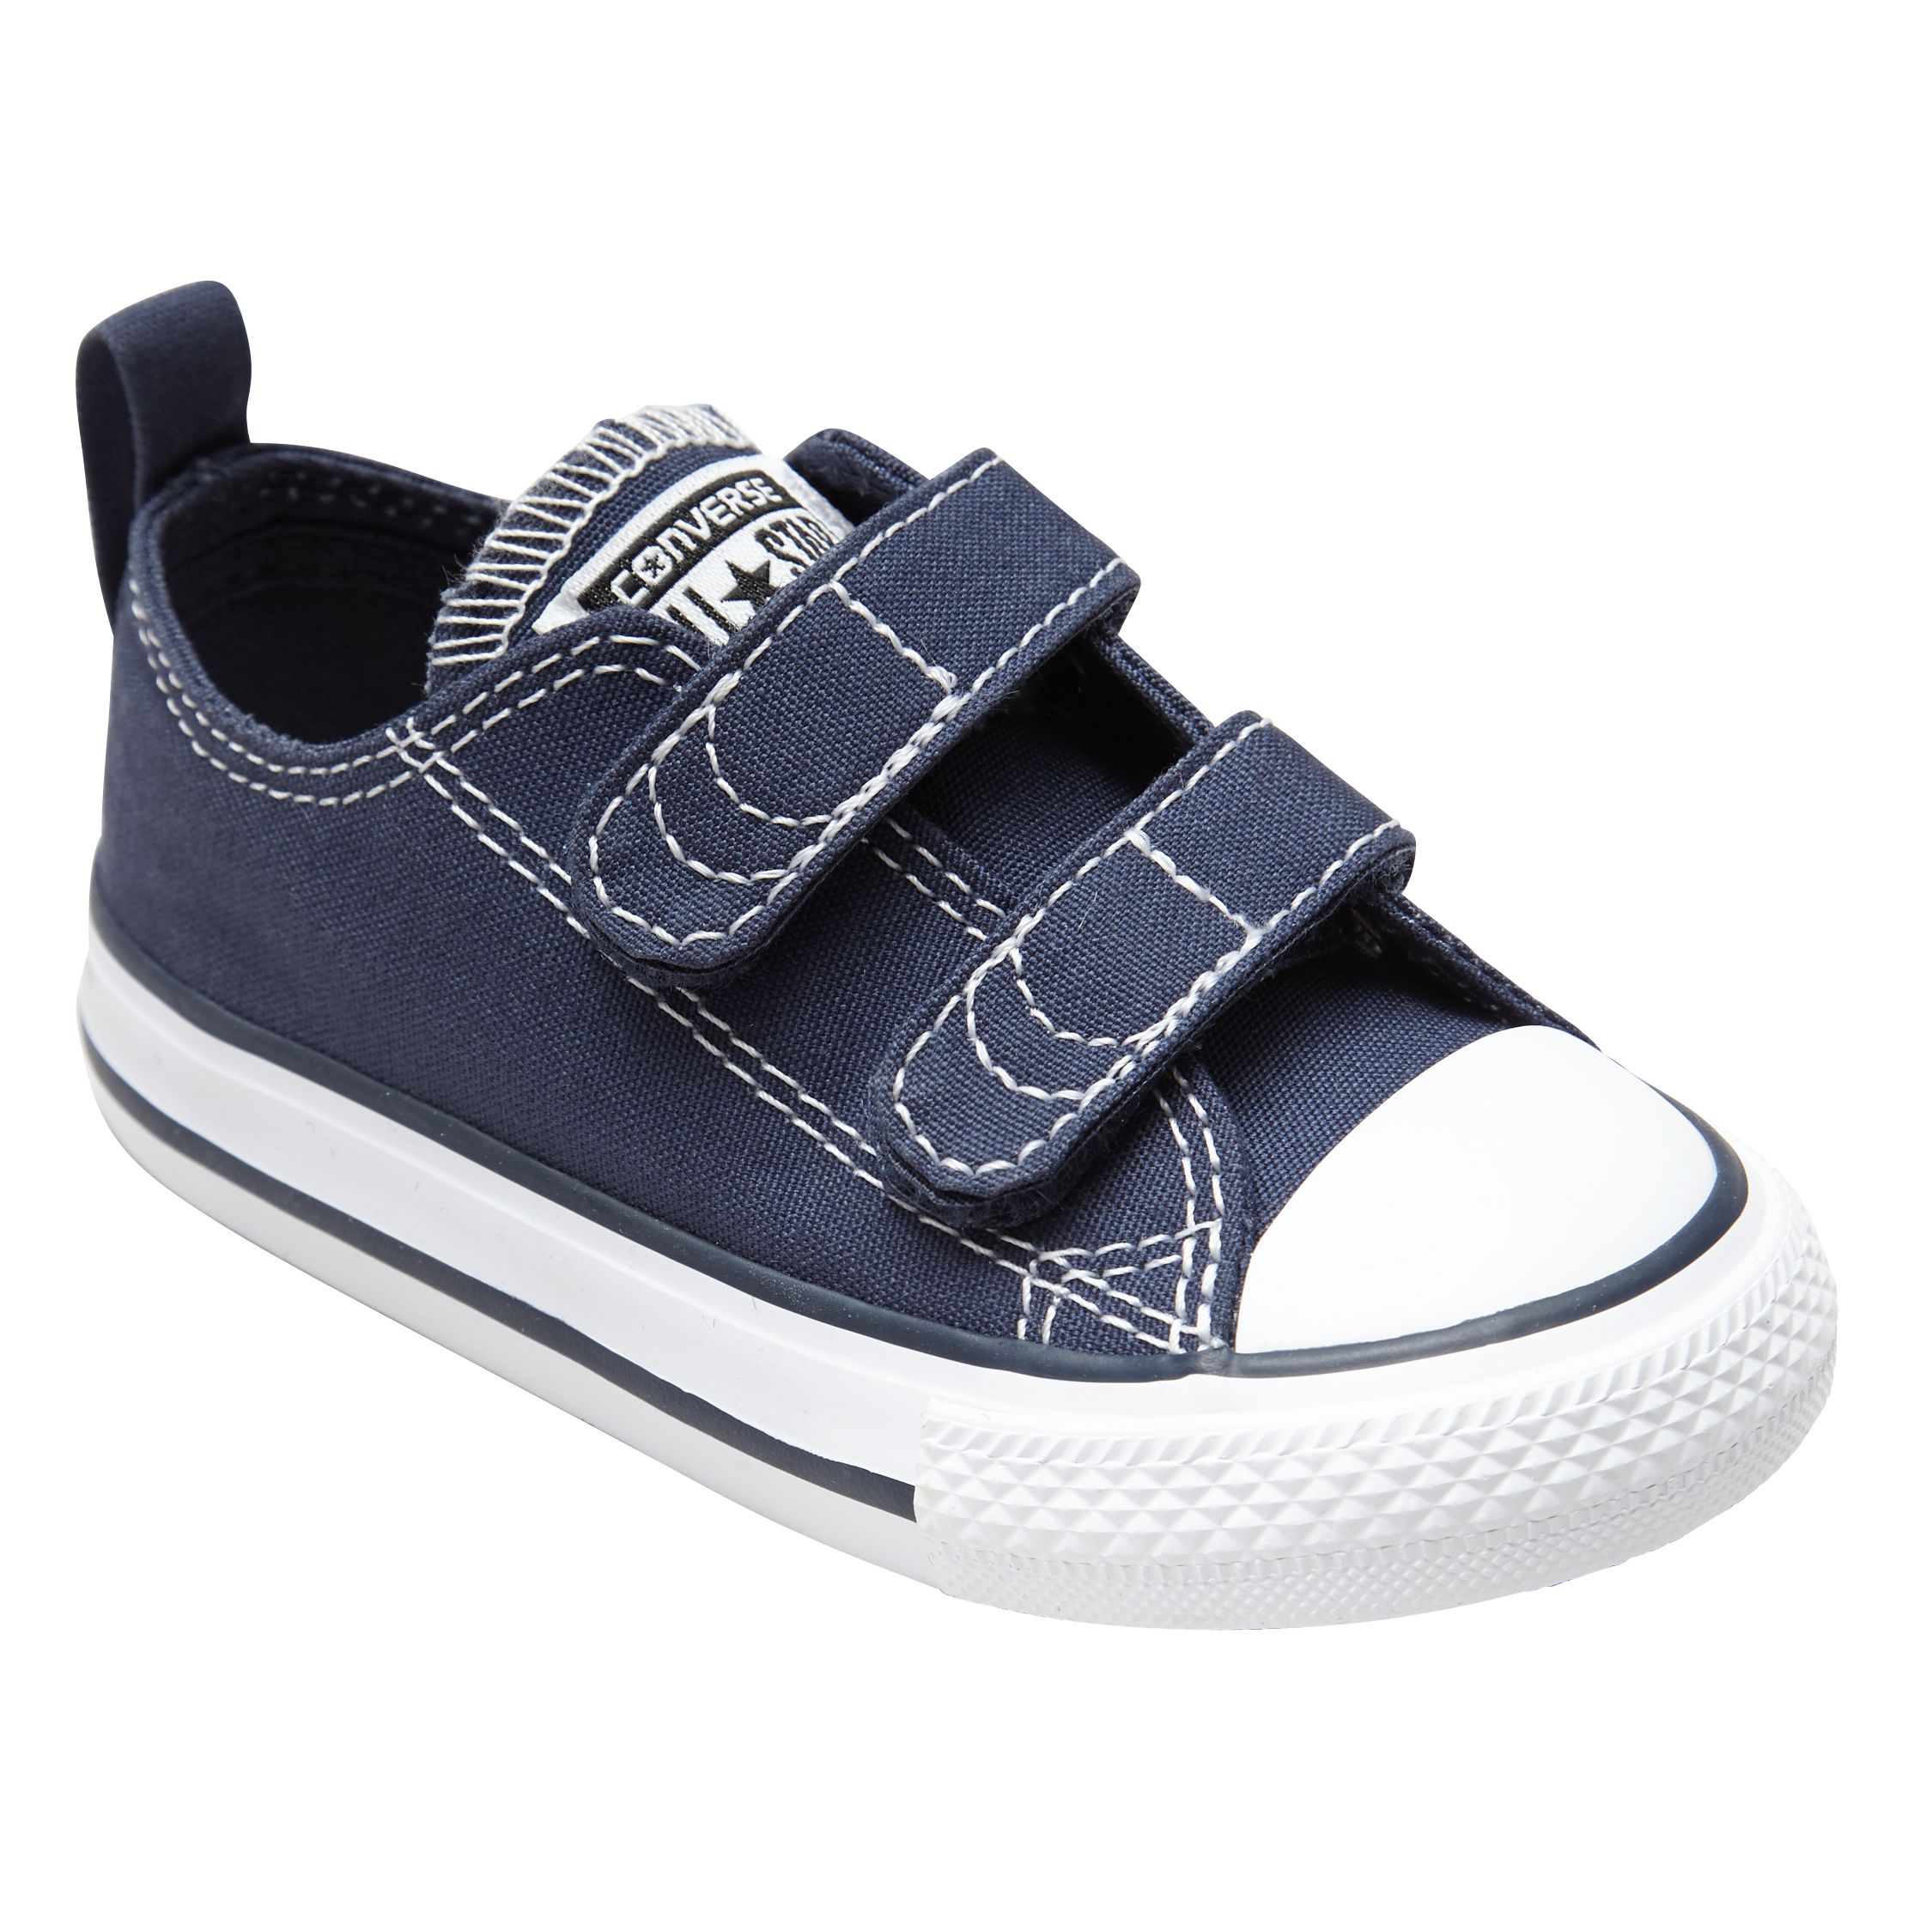 Converse Children's Chuck Taylor All Star Riptape Trainers, Navy